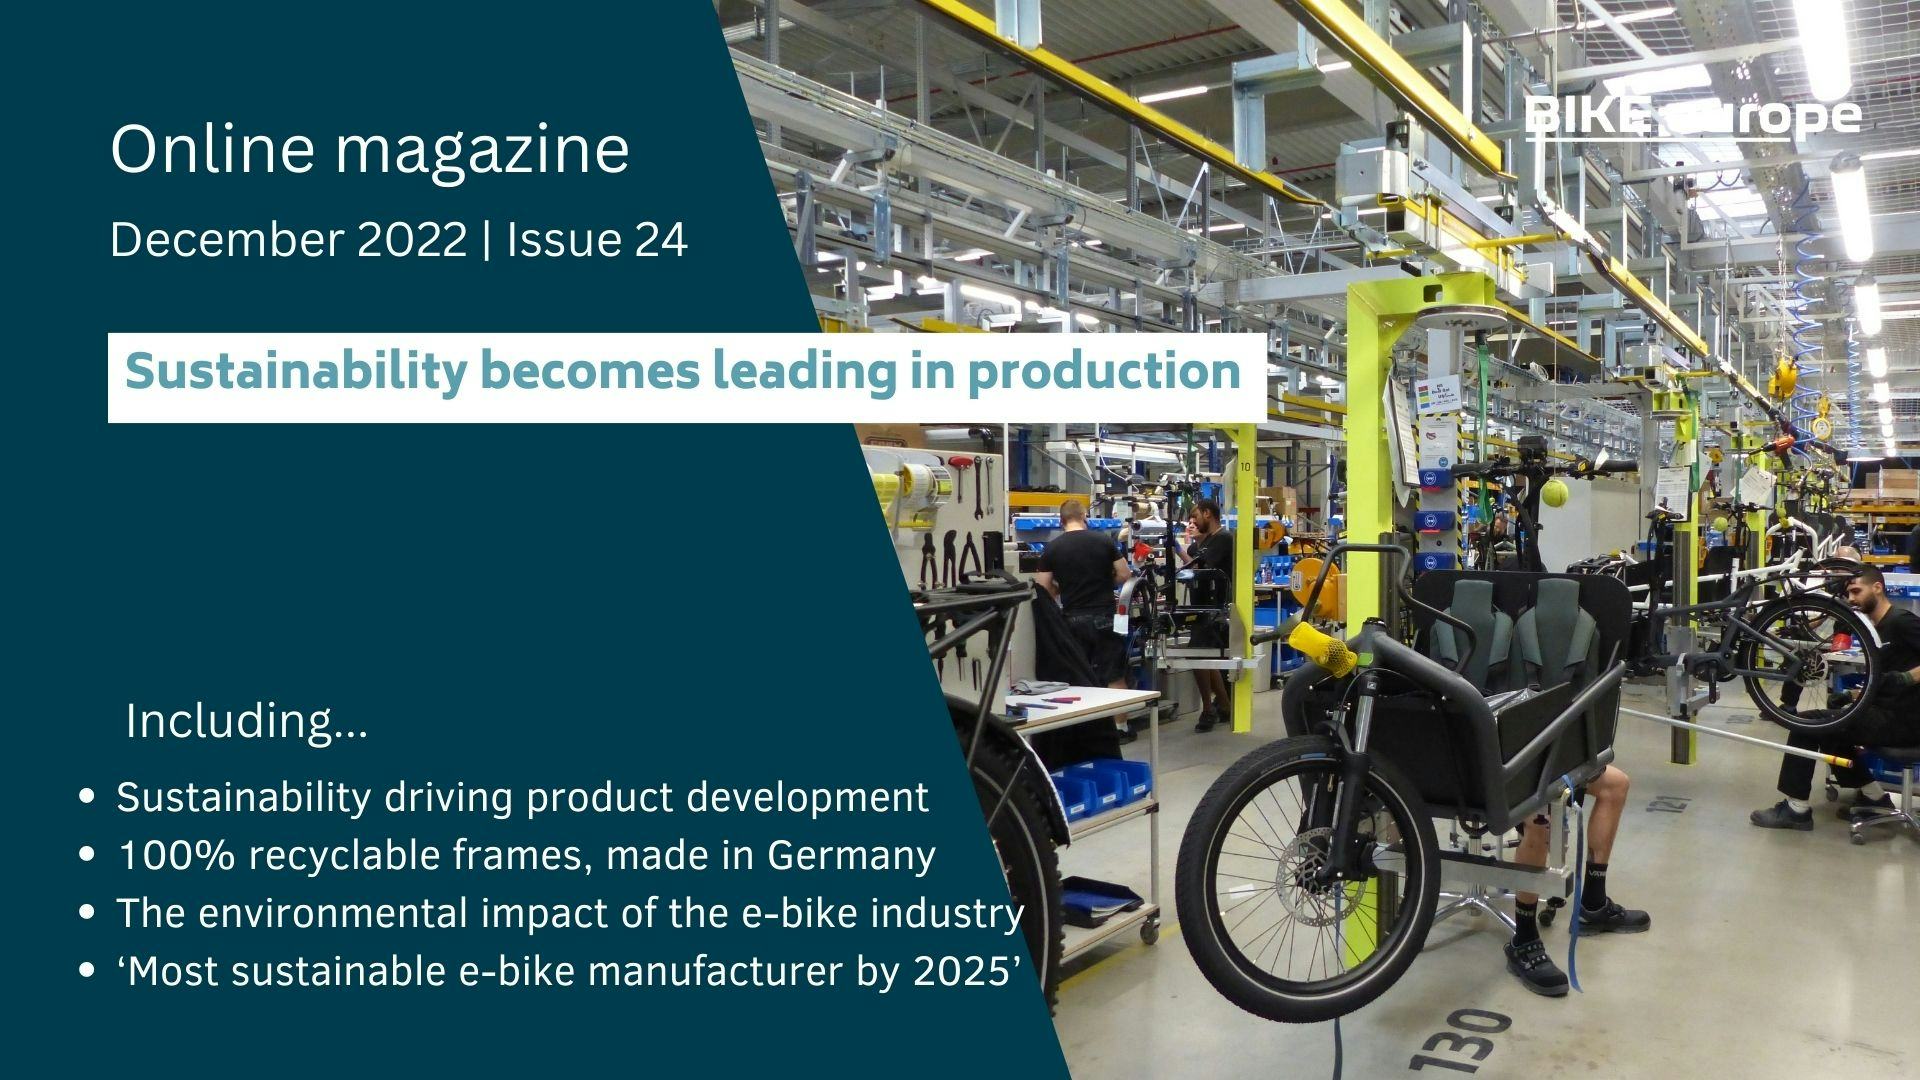 Online Magazine: Sustainability becomes leading in production